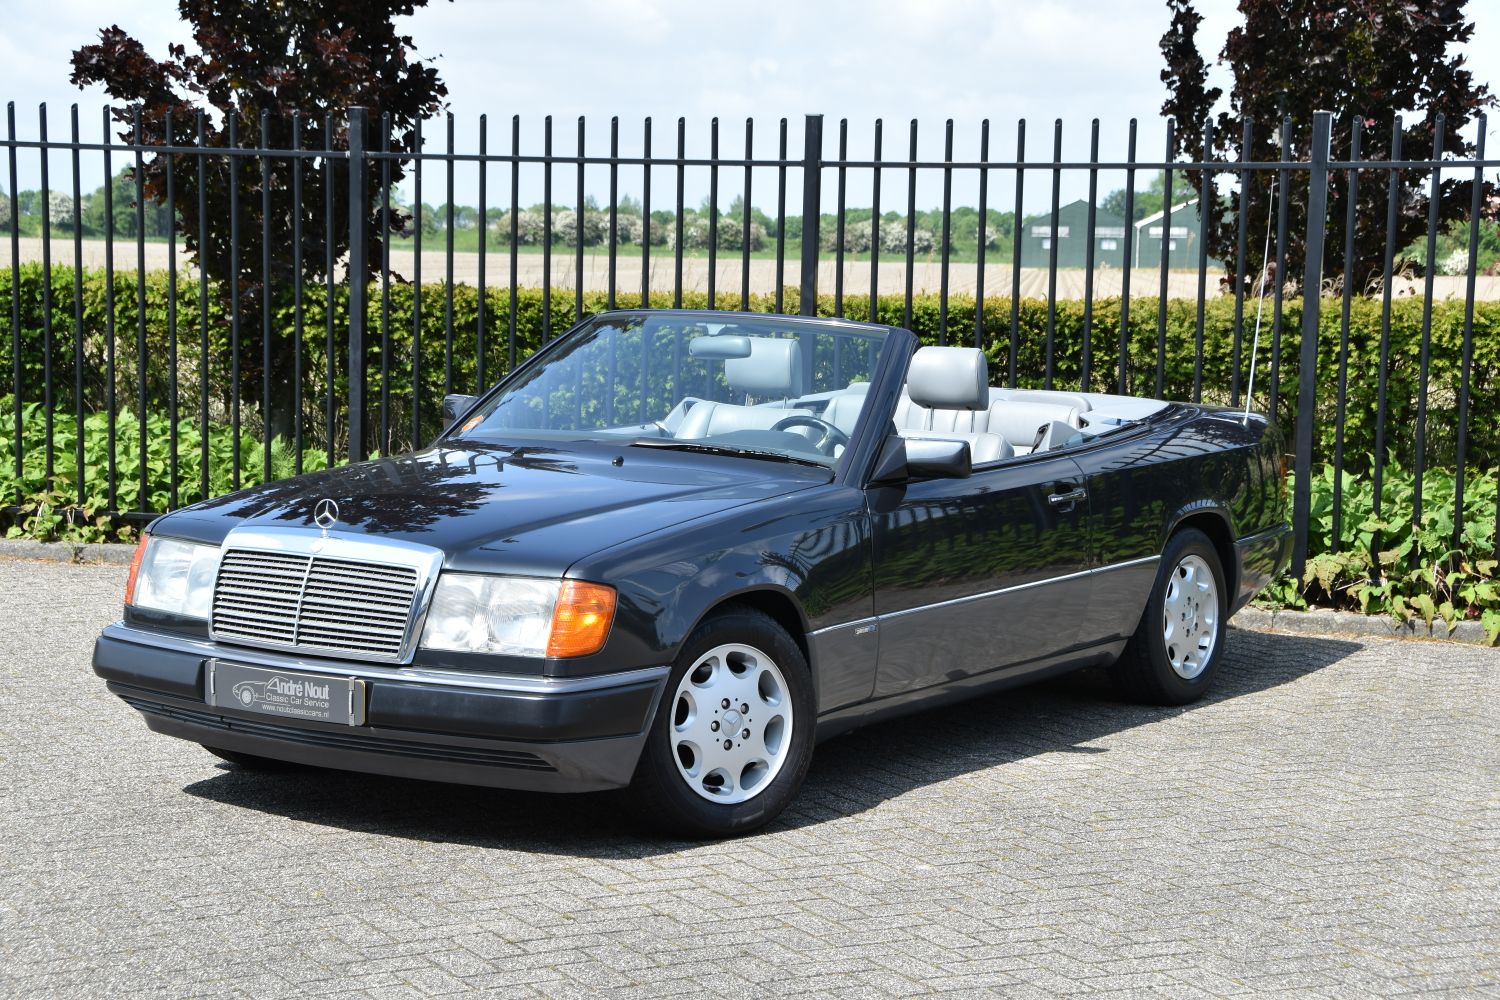 Img139mercedes 300 Ce 24 Ch124 Cabriolet